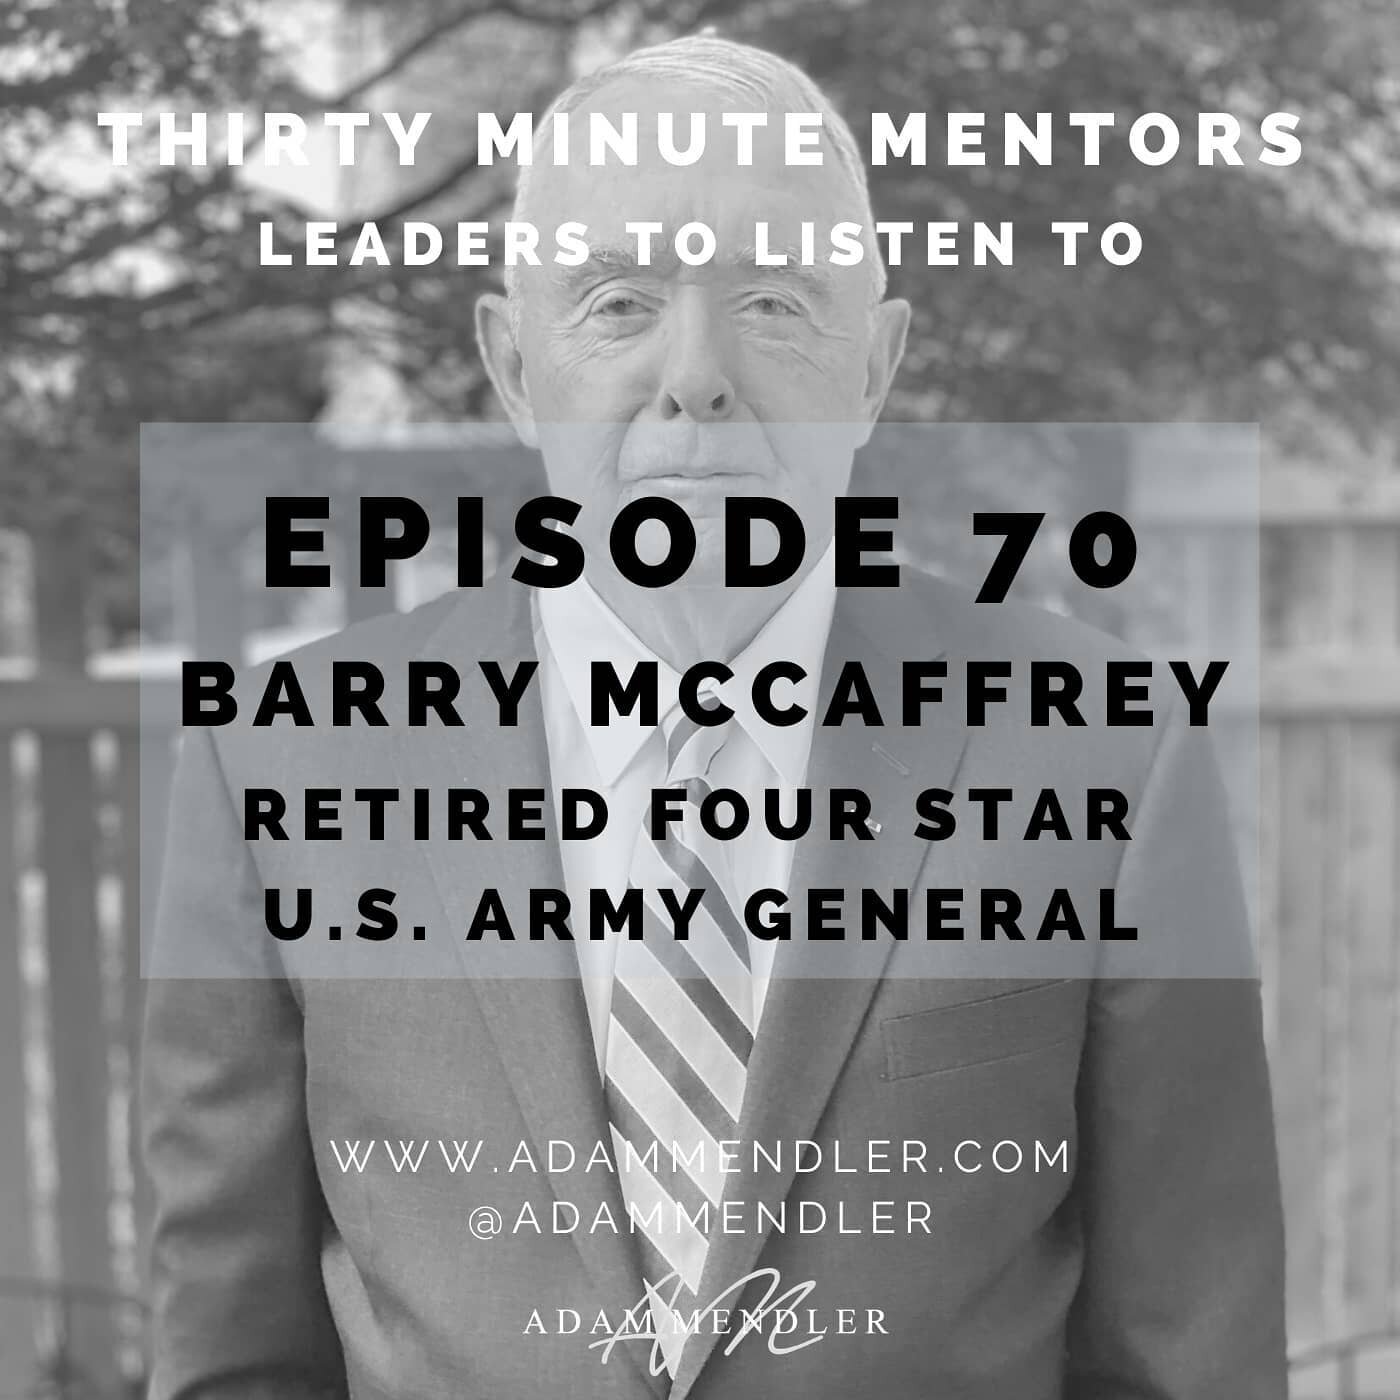 General Barry McCaffrey is one of the most decorated military leaders over the past half-century: the leader of the decisive battle in the Persian Gulf War, the youngest four star general at the time of his retirement, a member of the U.S. Army Range